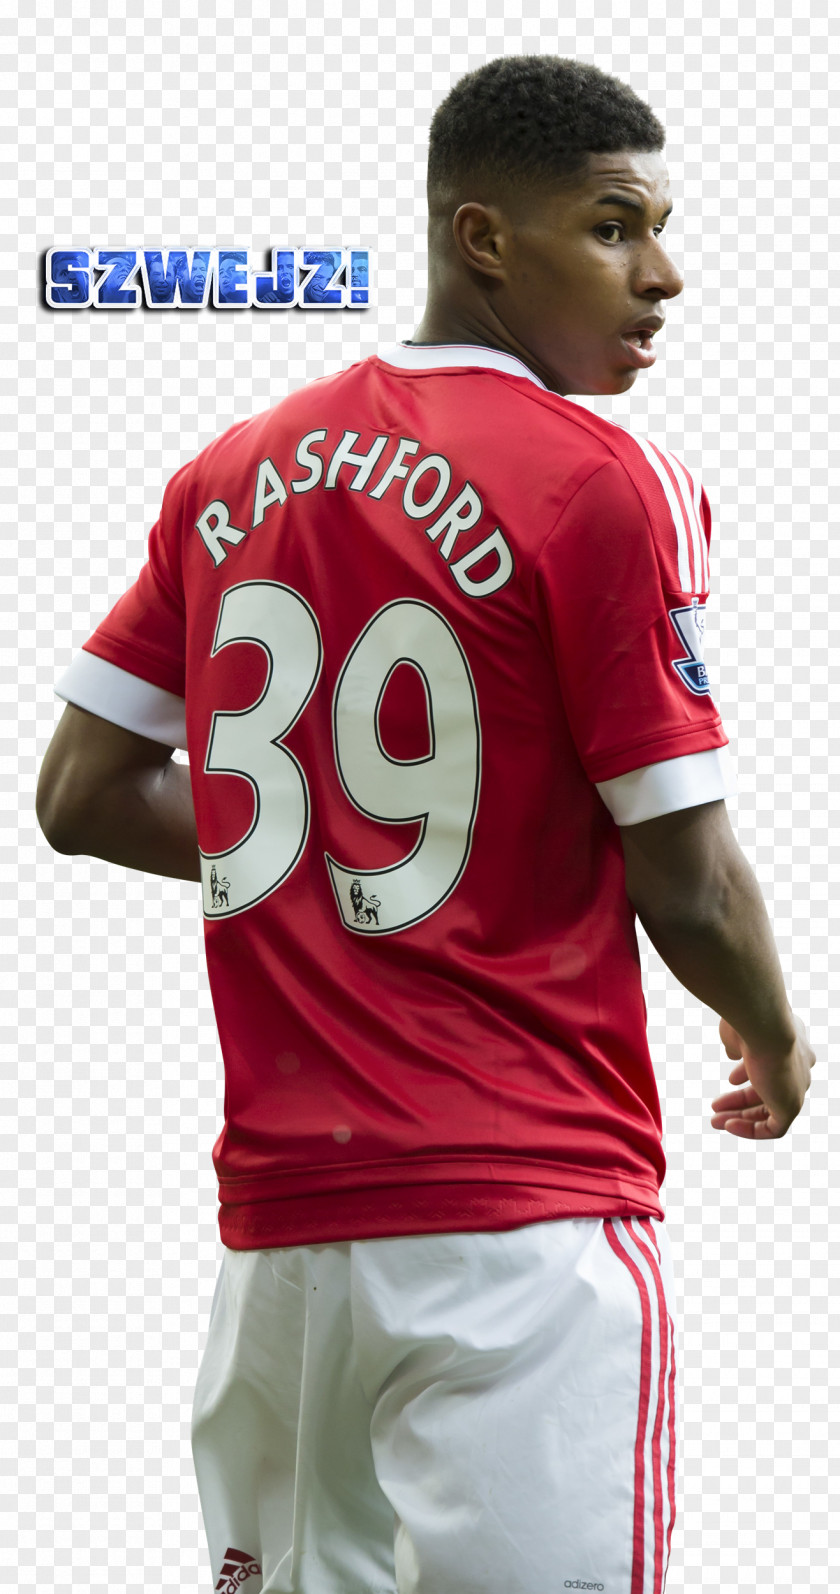 Marcus Rashford Manchester United F.C. Jersey Football Player PNG